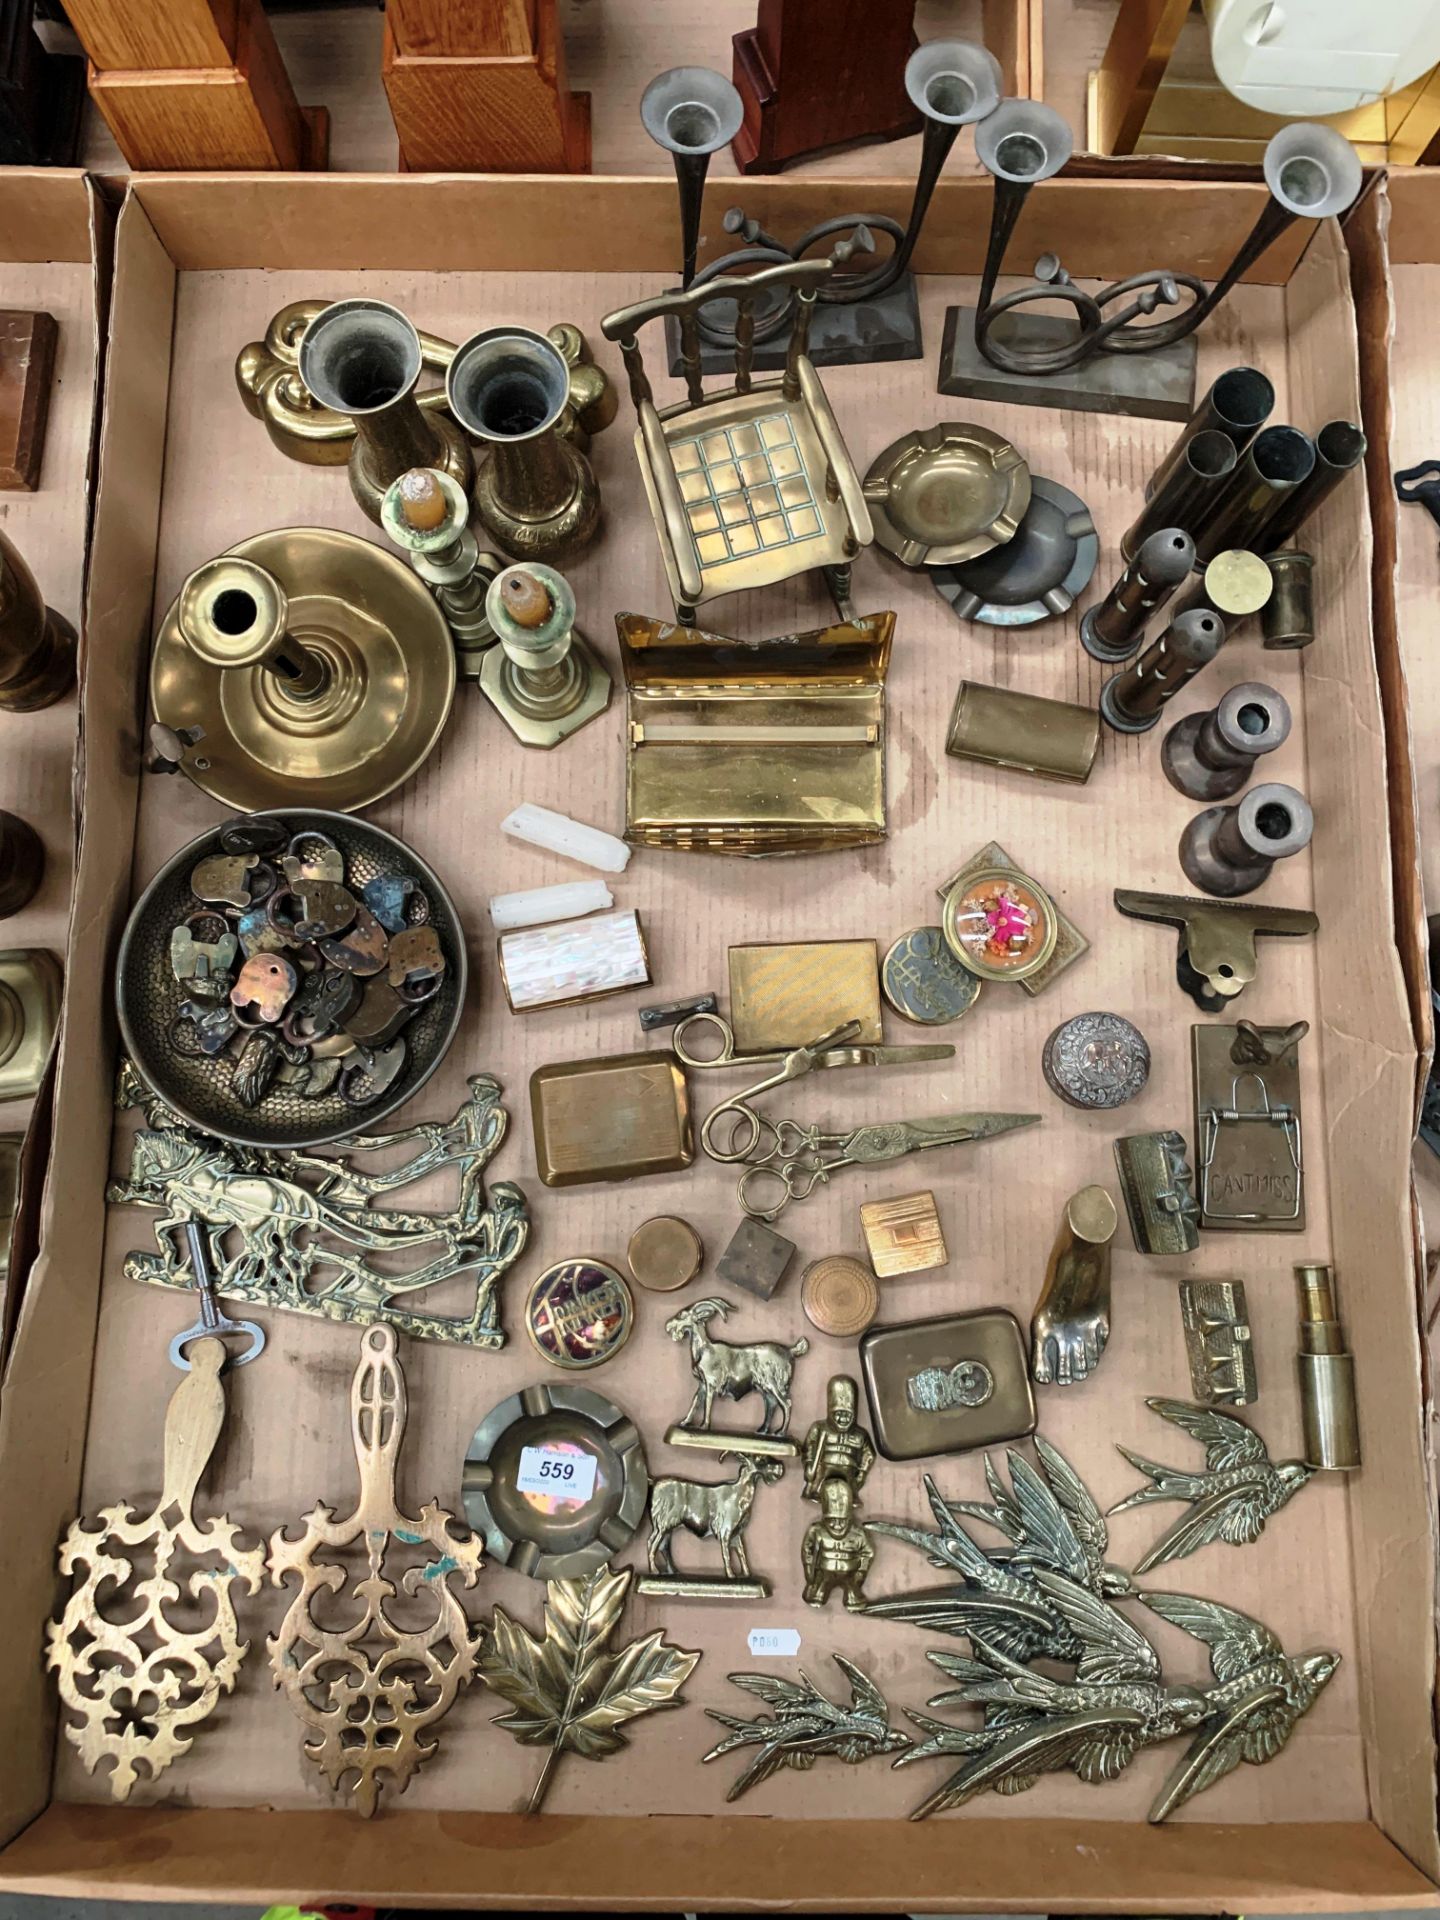 Contents to tray - a large collection of brassware candlesticks, candle snuffers,